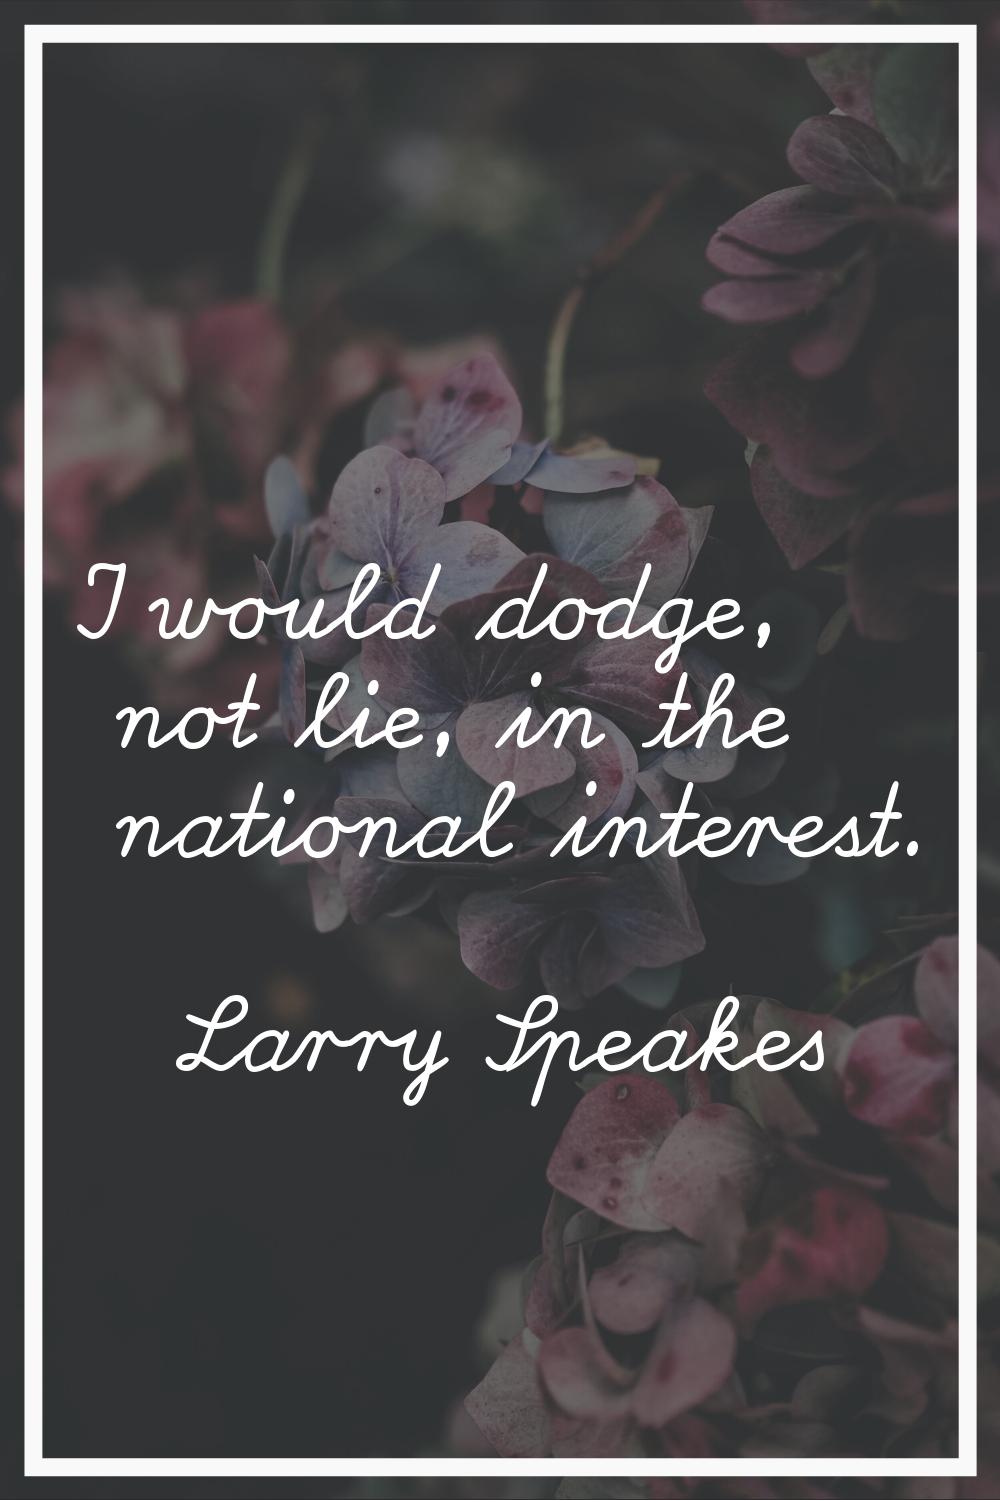 I would dodge, not lie, in the national interest.